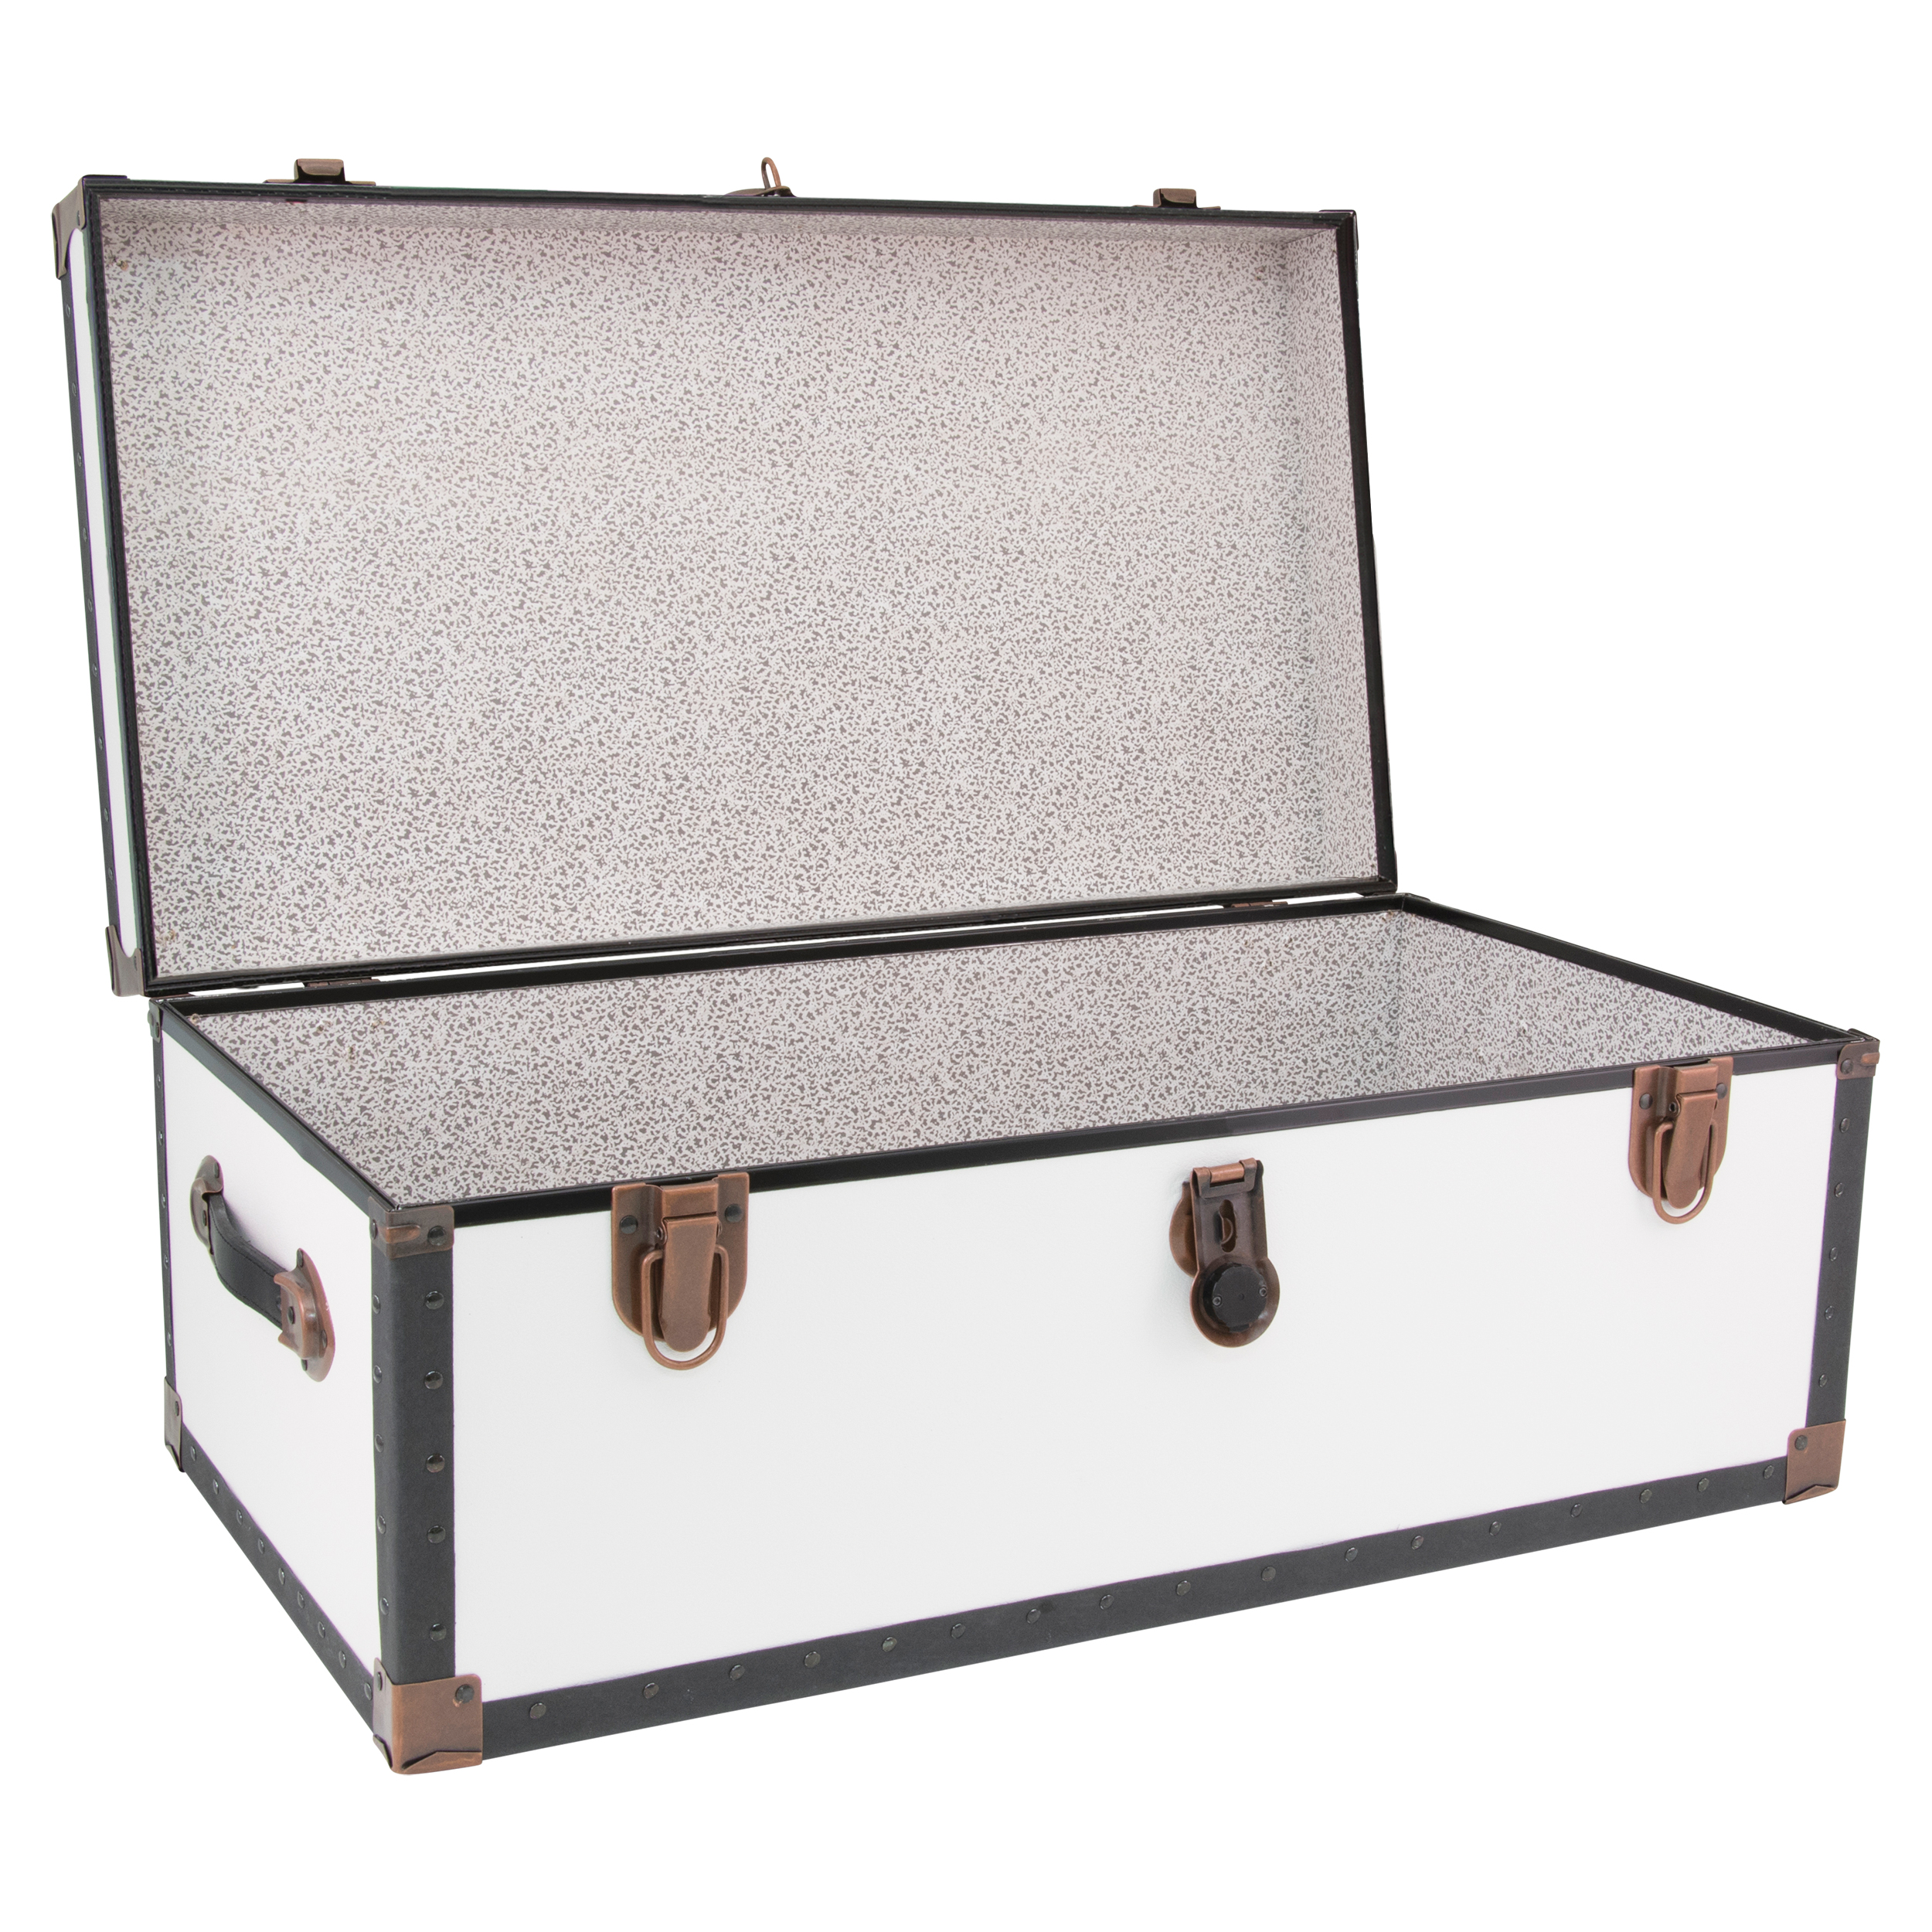 Seward Trunks 25 Gallon Wood, Plastic and Metal Trunk, White - image 5 of 8